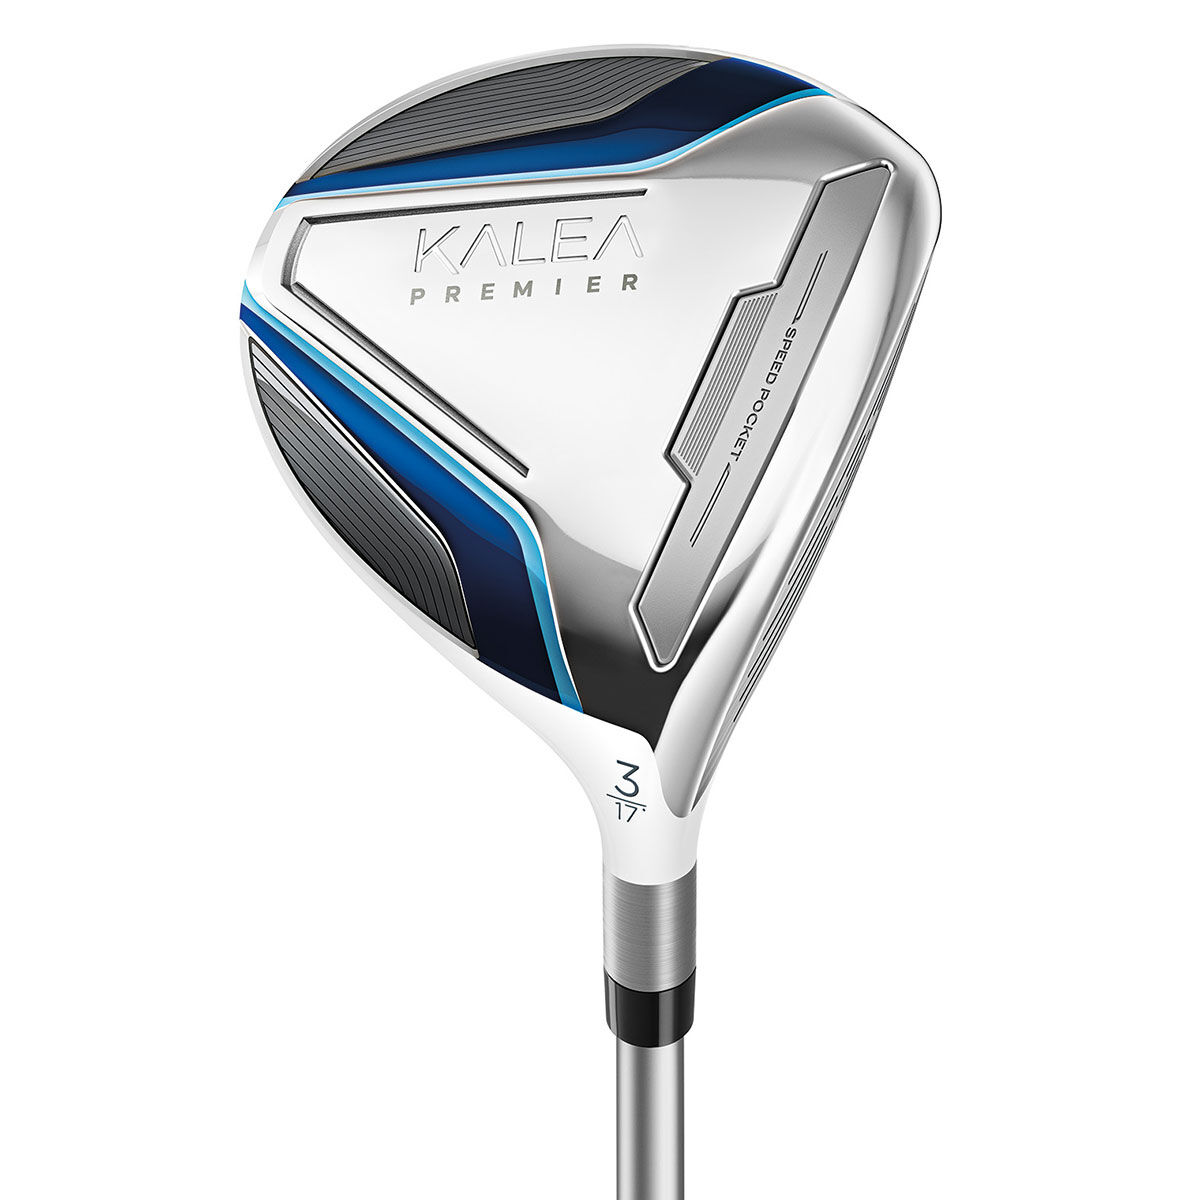 TaylorMade Silver and Blue Women's Kalea Premier Right Hand Golf Fairway Wood, Size: 20° | American Golf von TaylorMade